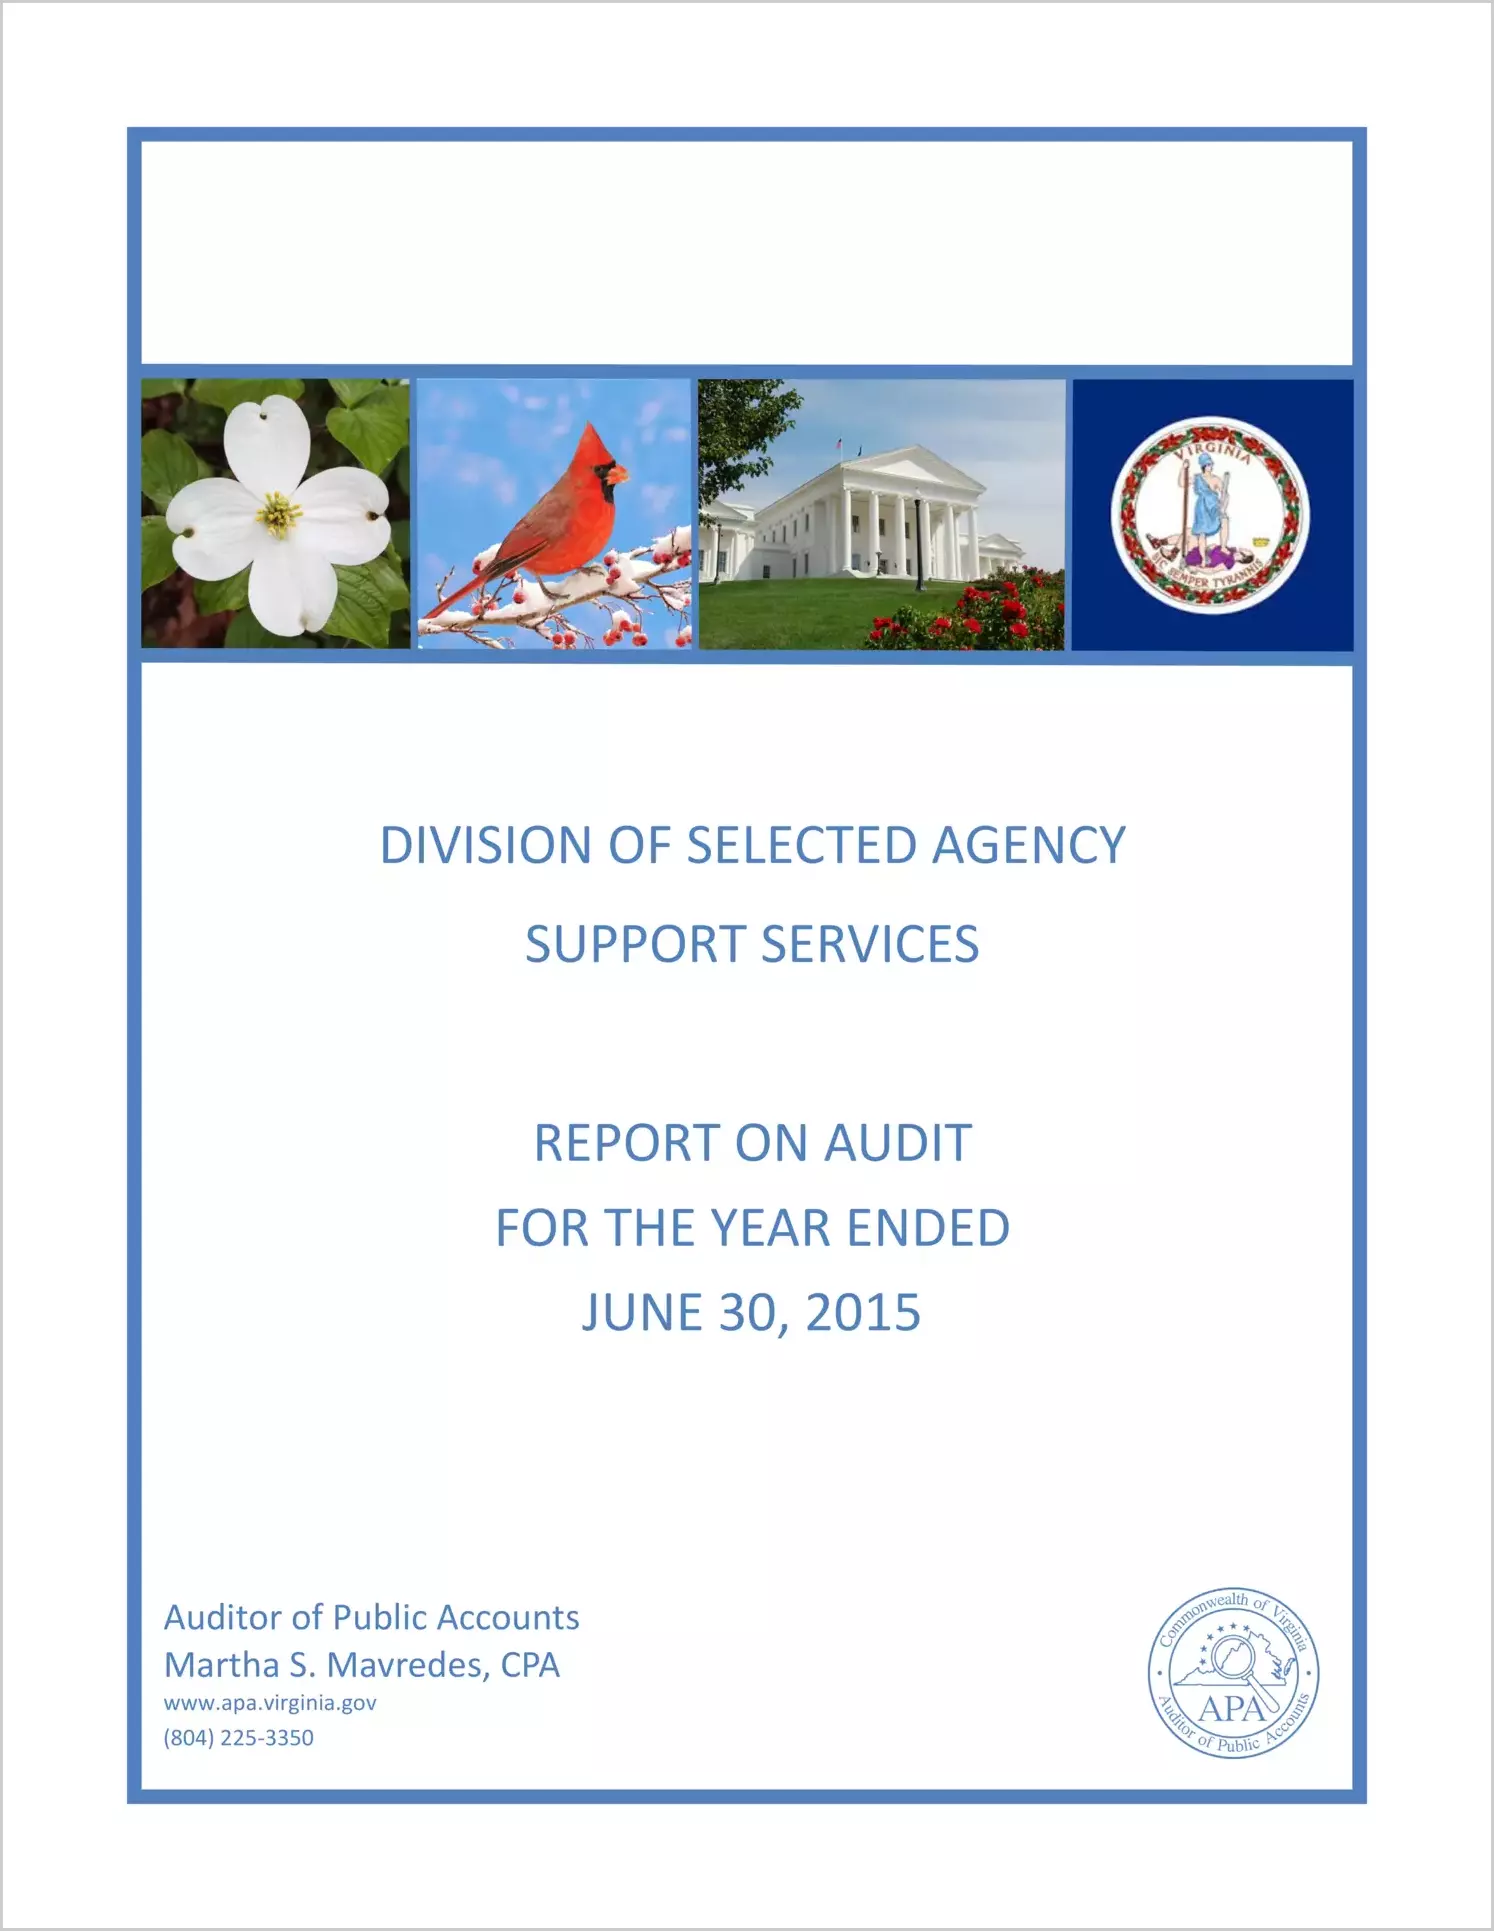 Division of Selected Agency Support Services for the year ended June 30, 2015